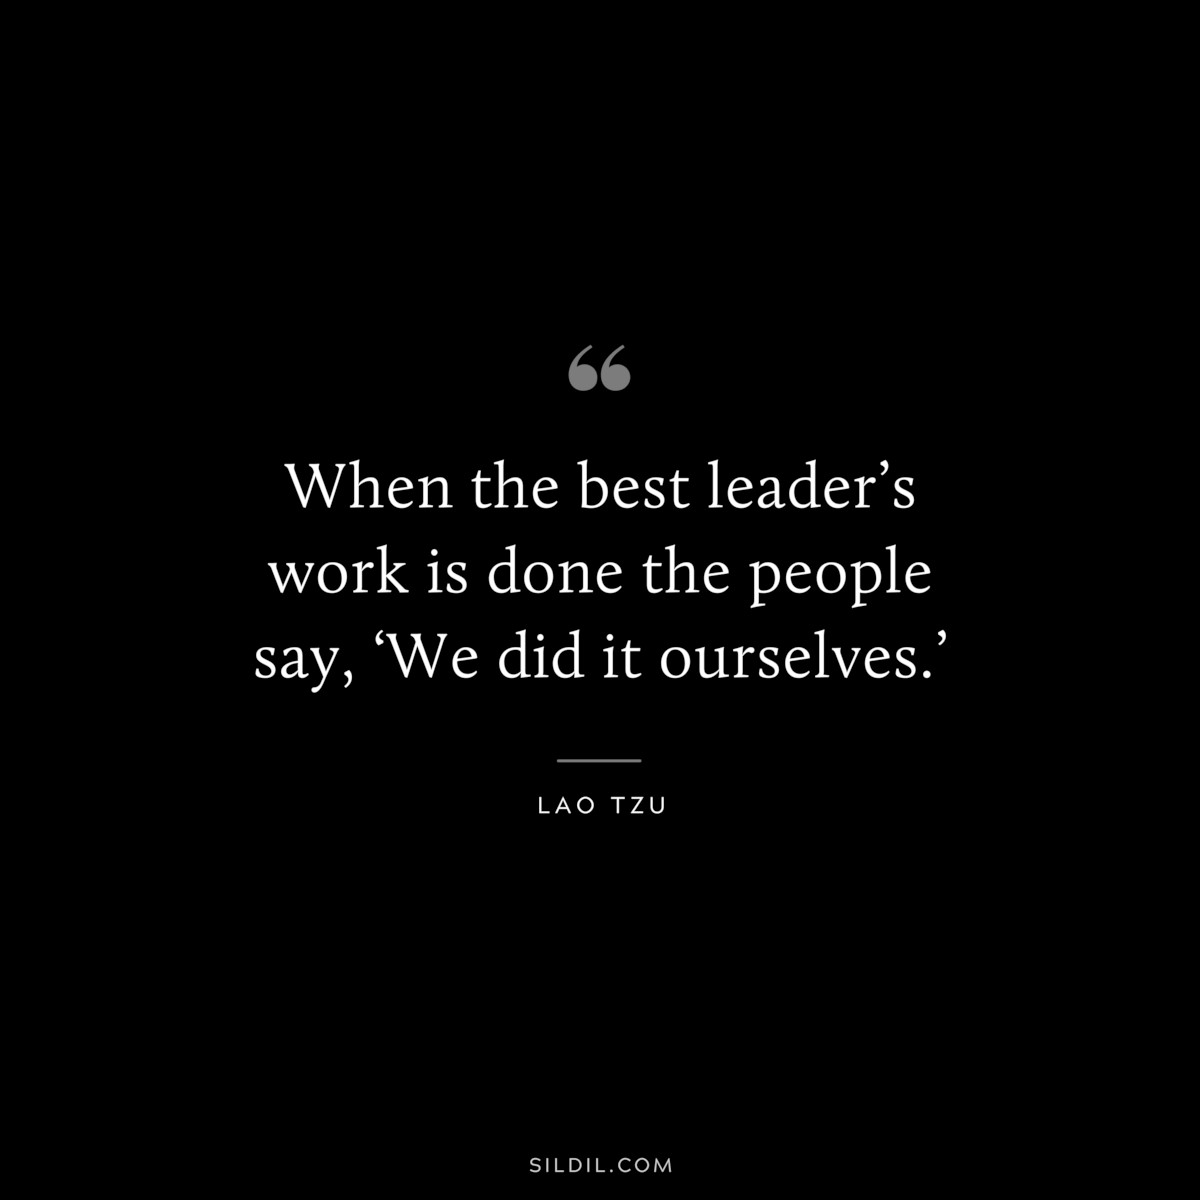 When the best leader’s work is done the people say, ‘We did it ourselves.’ ― Lao Tzu